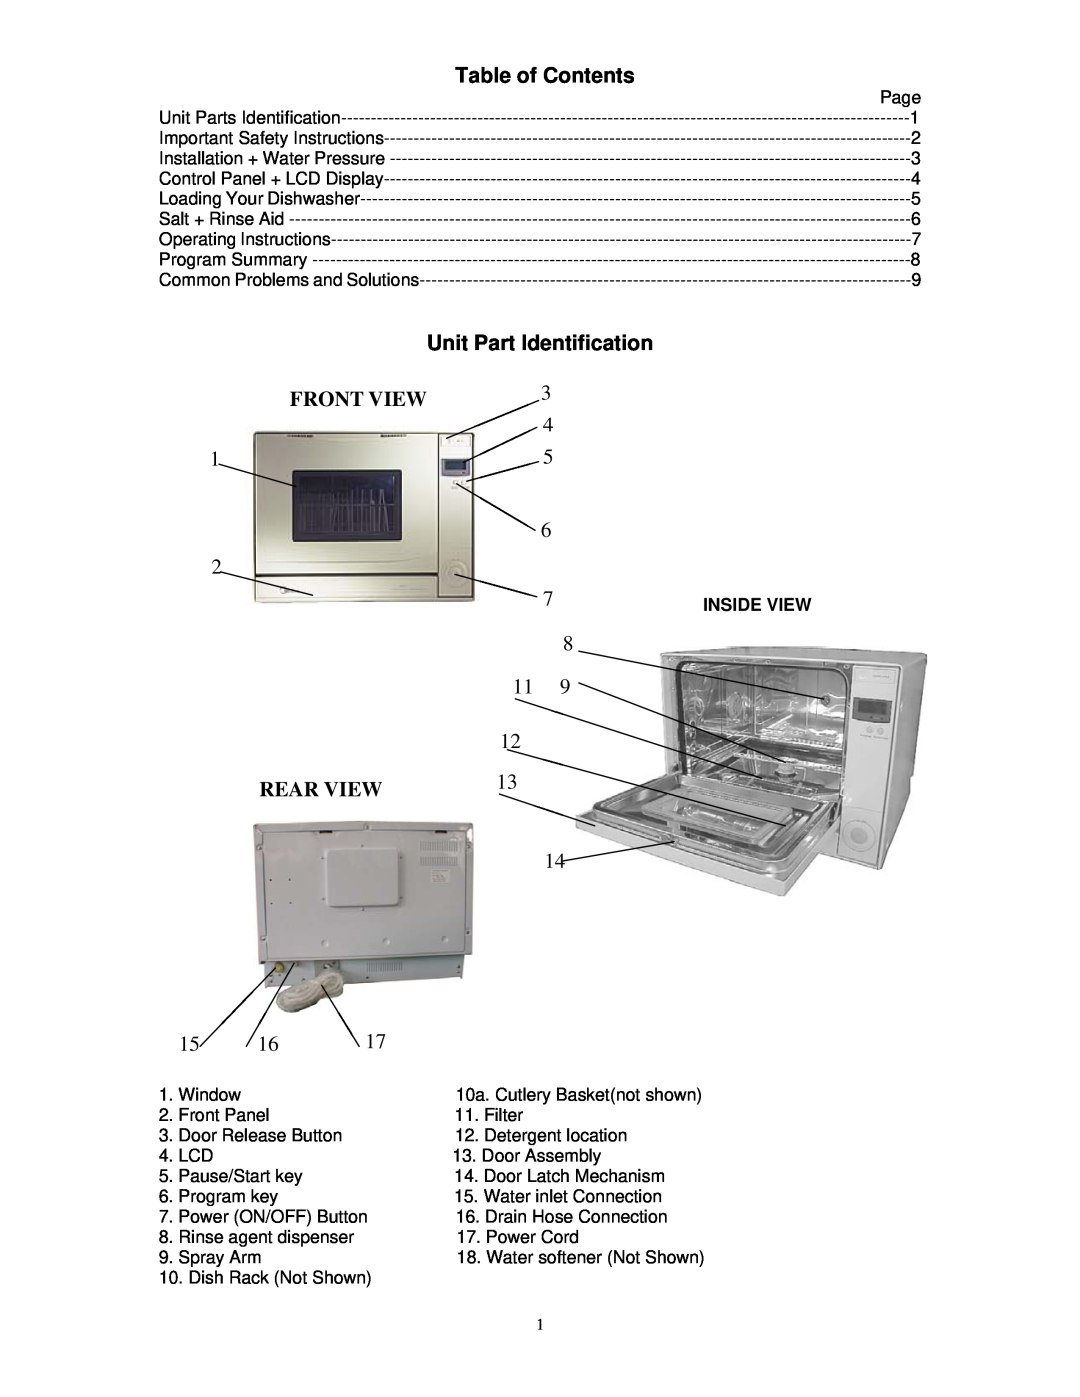 Kenwood KDW4TTSL owner manual Table of Contents, Unit Part Identification, Front View, Rear View 